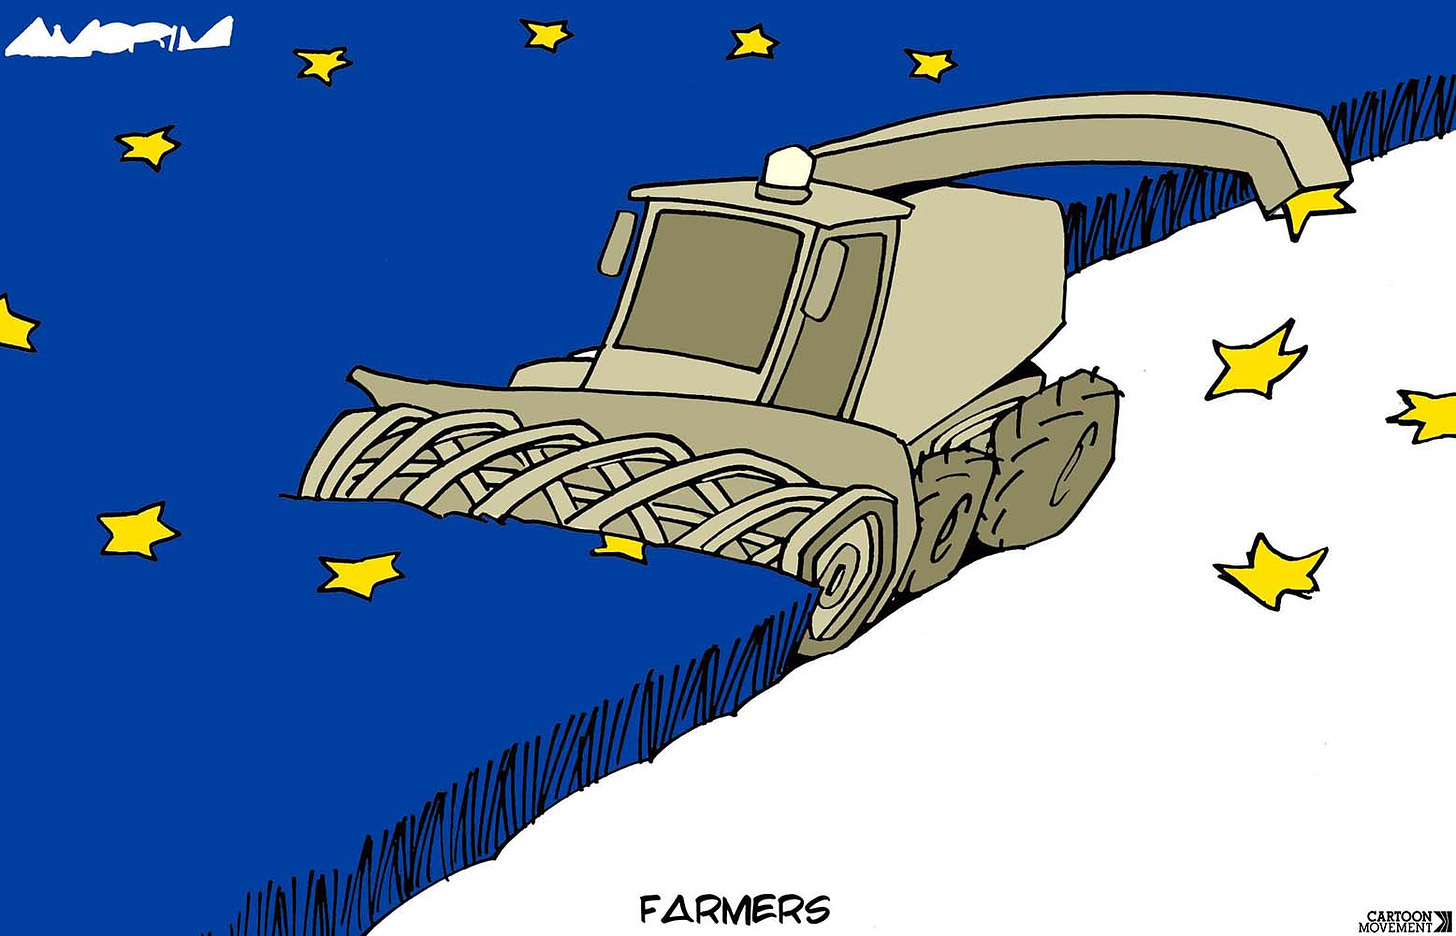 Cartoon showing a combine harvester. The field of grain it is harvesting has a EU flag on it, while the harvest itself, coming out of the side pipe, are the yellow stars on the European flag.